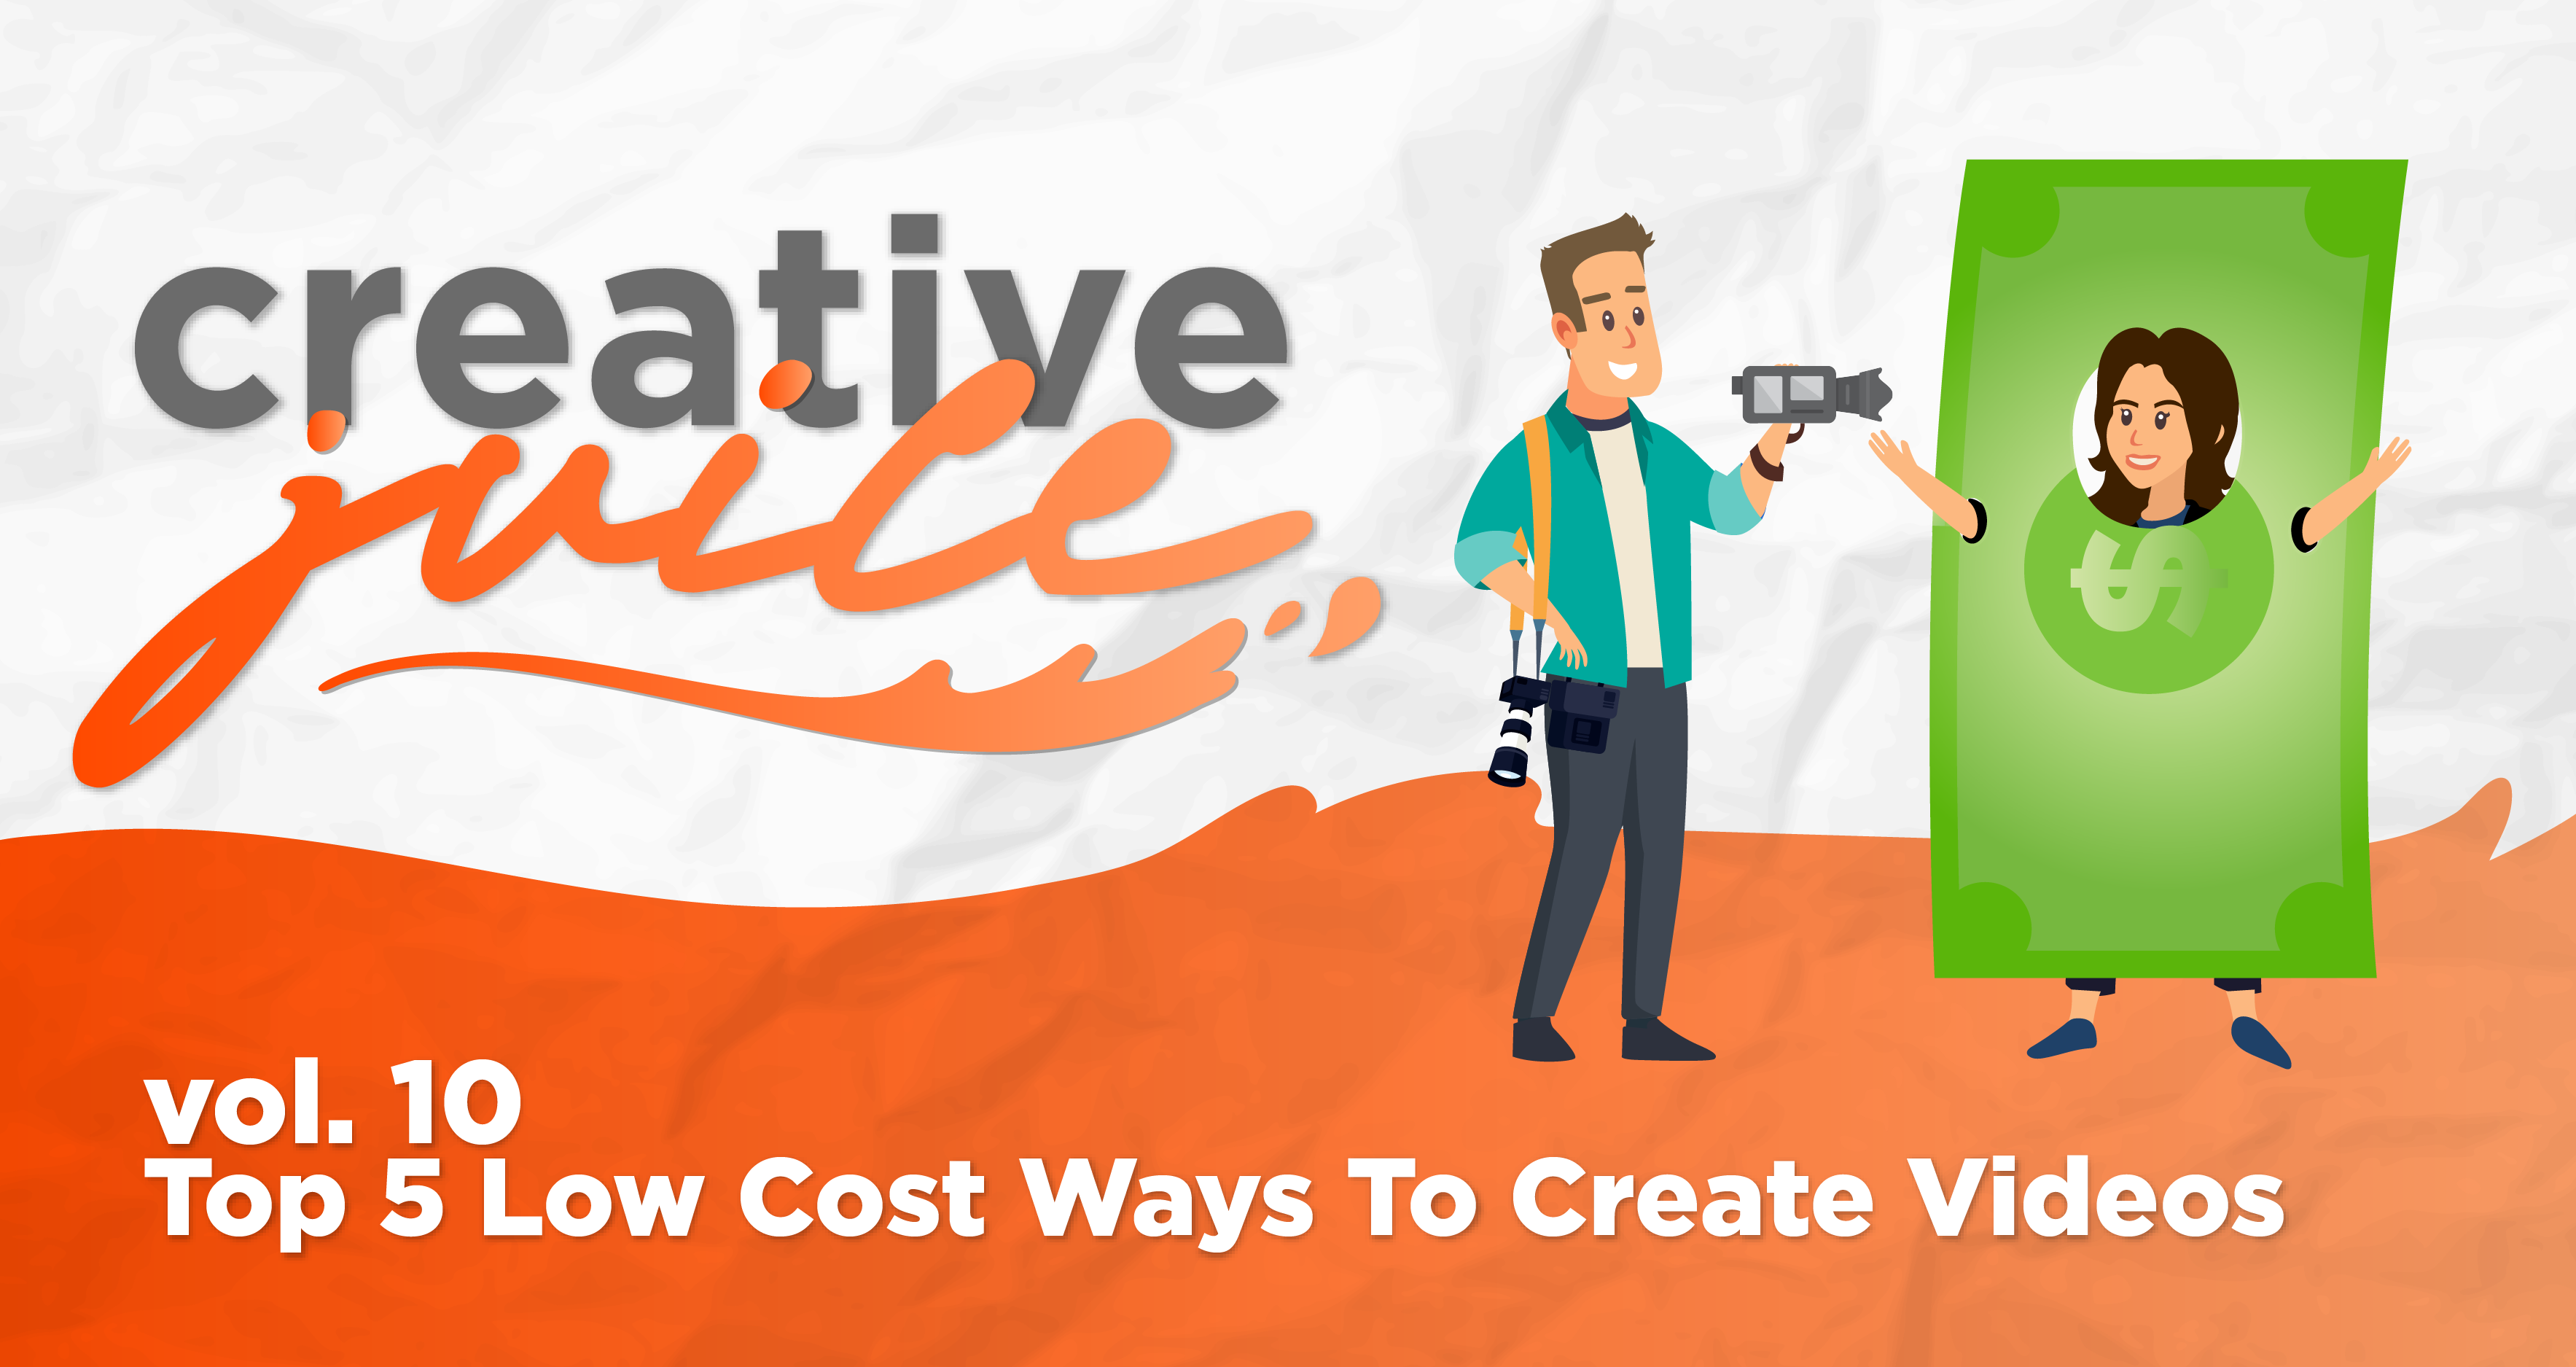 Creative Juice Vol. 10 - Top 5 Low Cost Ways to Create Videos Without Having to Hire Coal Creative